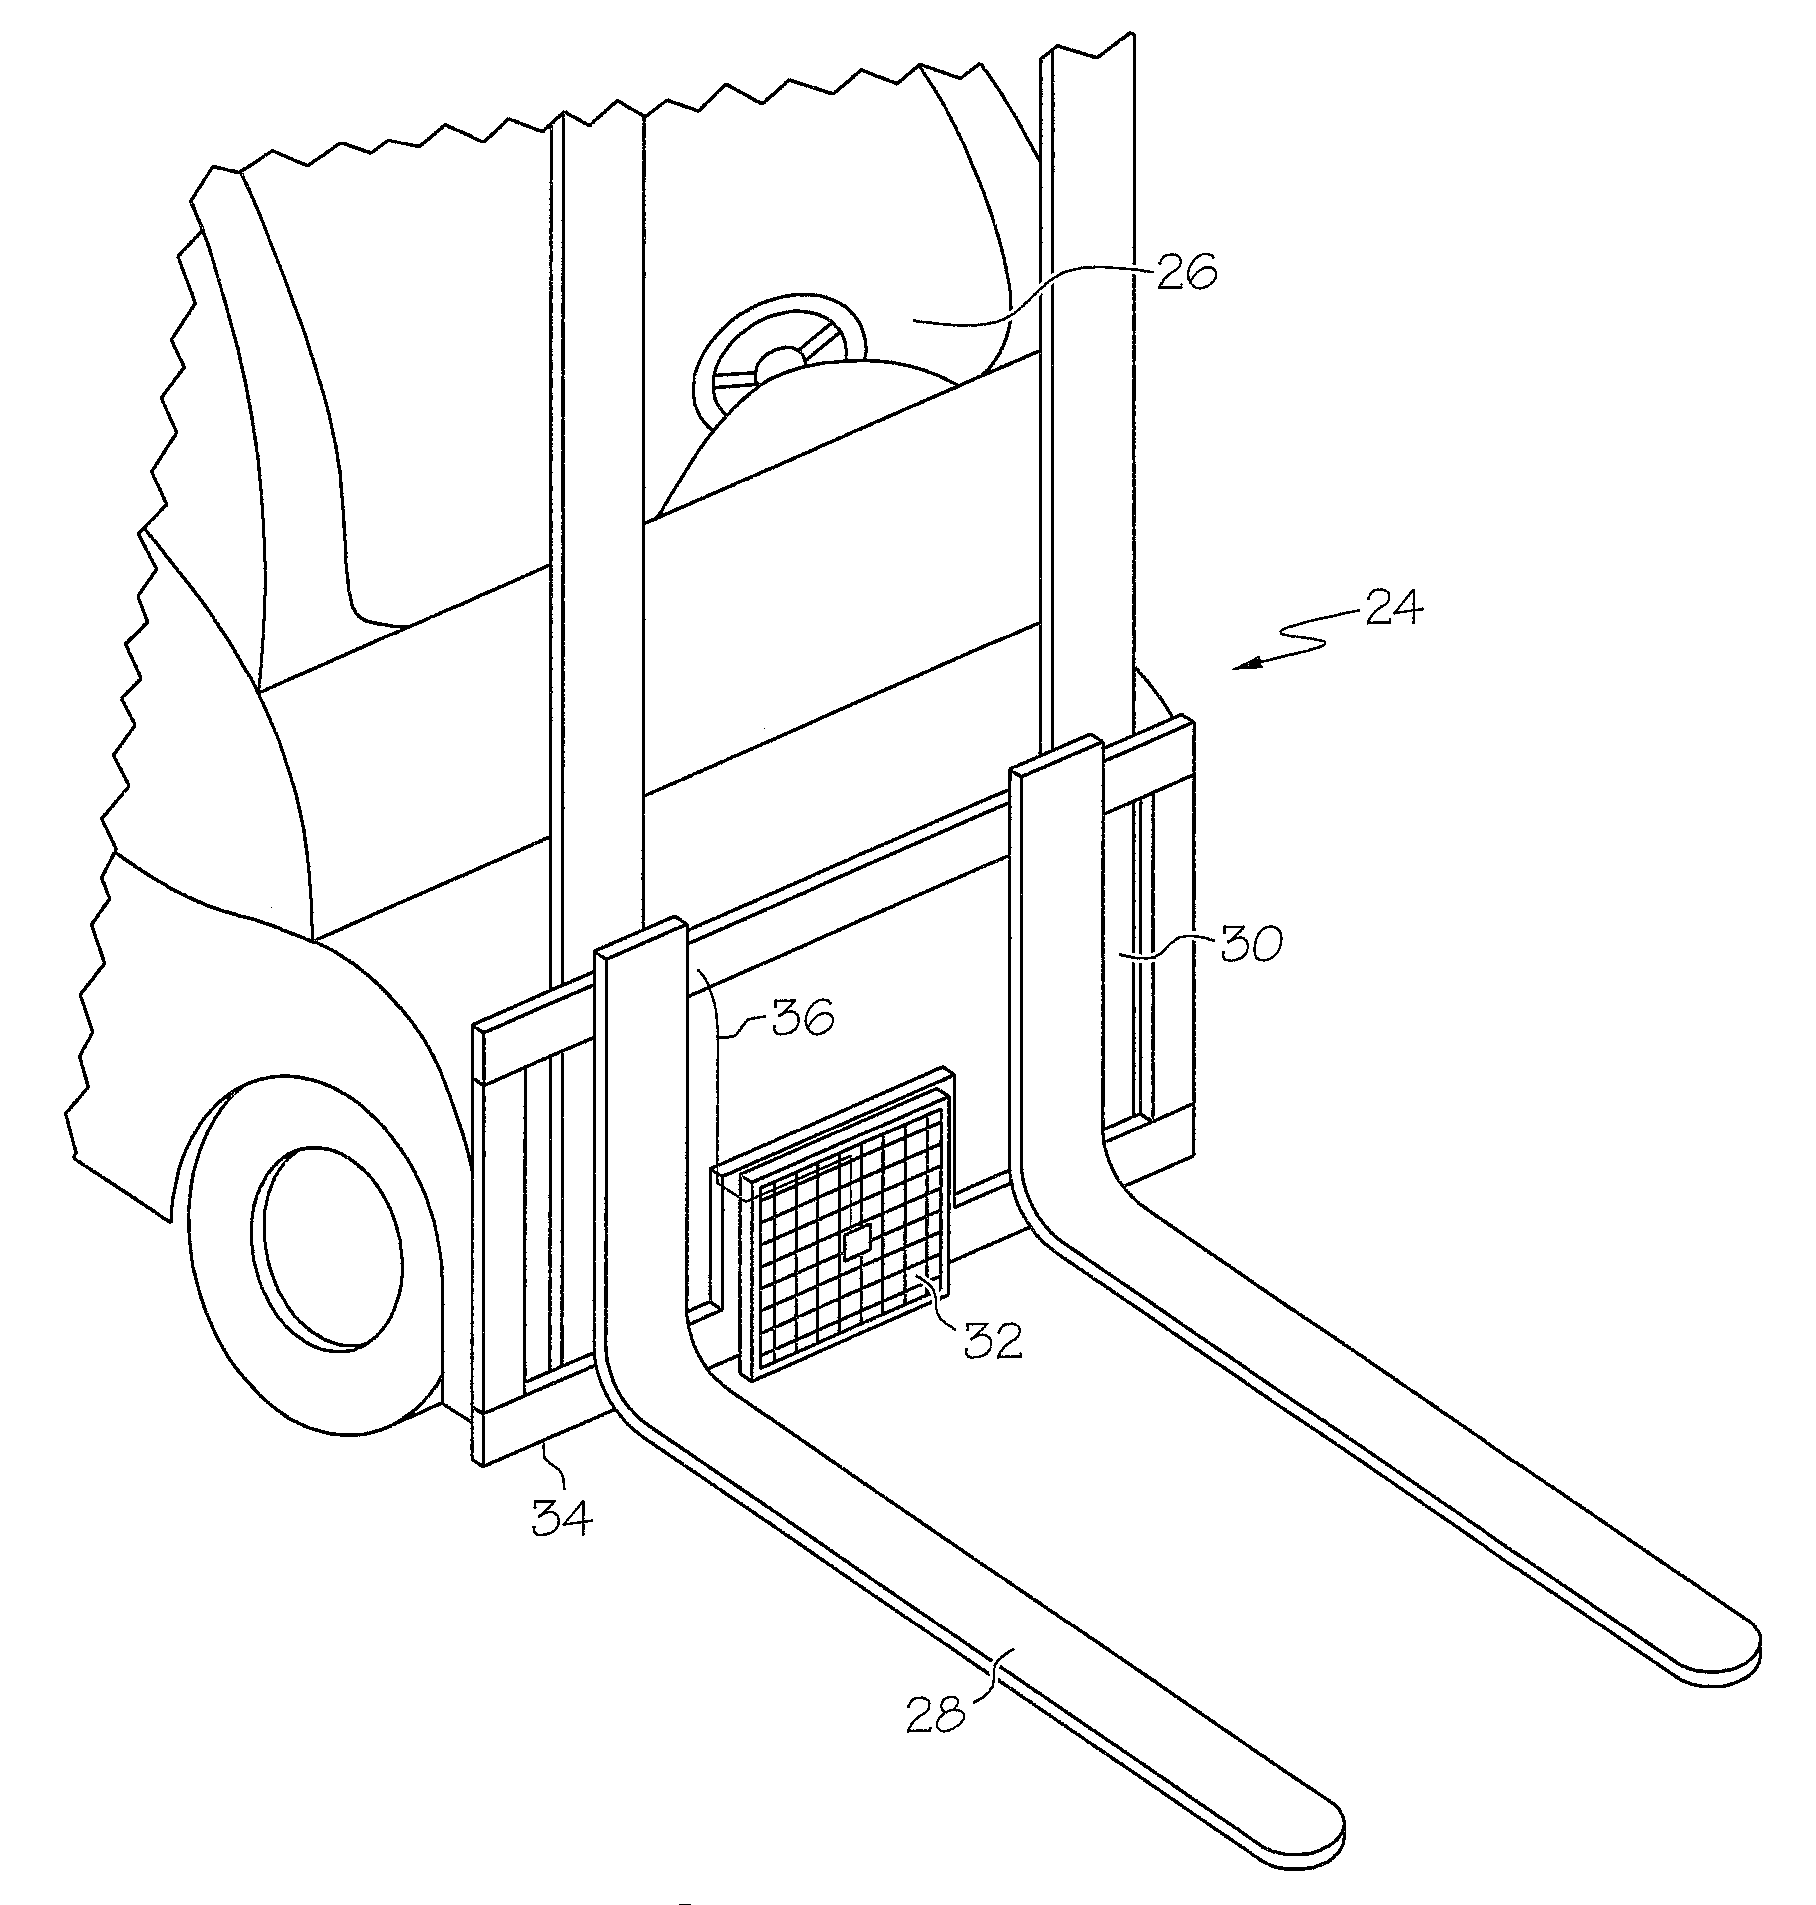 Industrial truck with at least one antenna for sending and receiving data